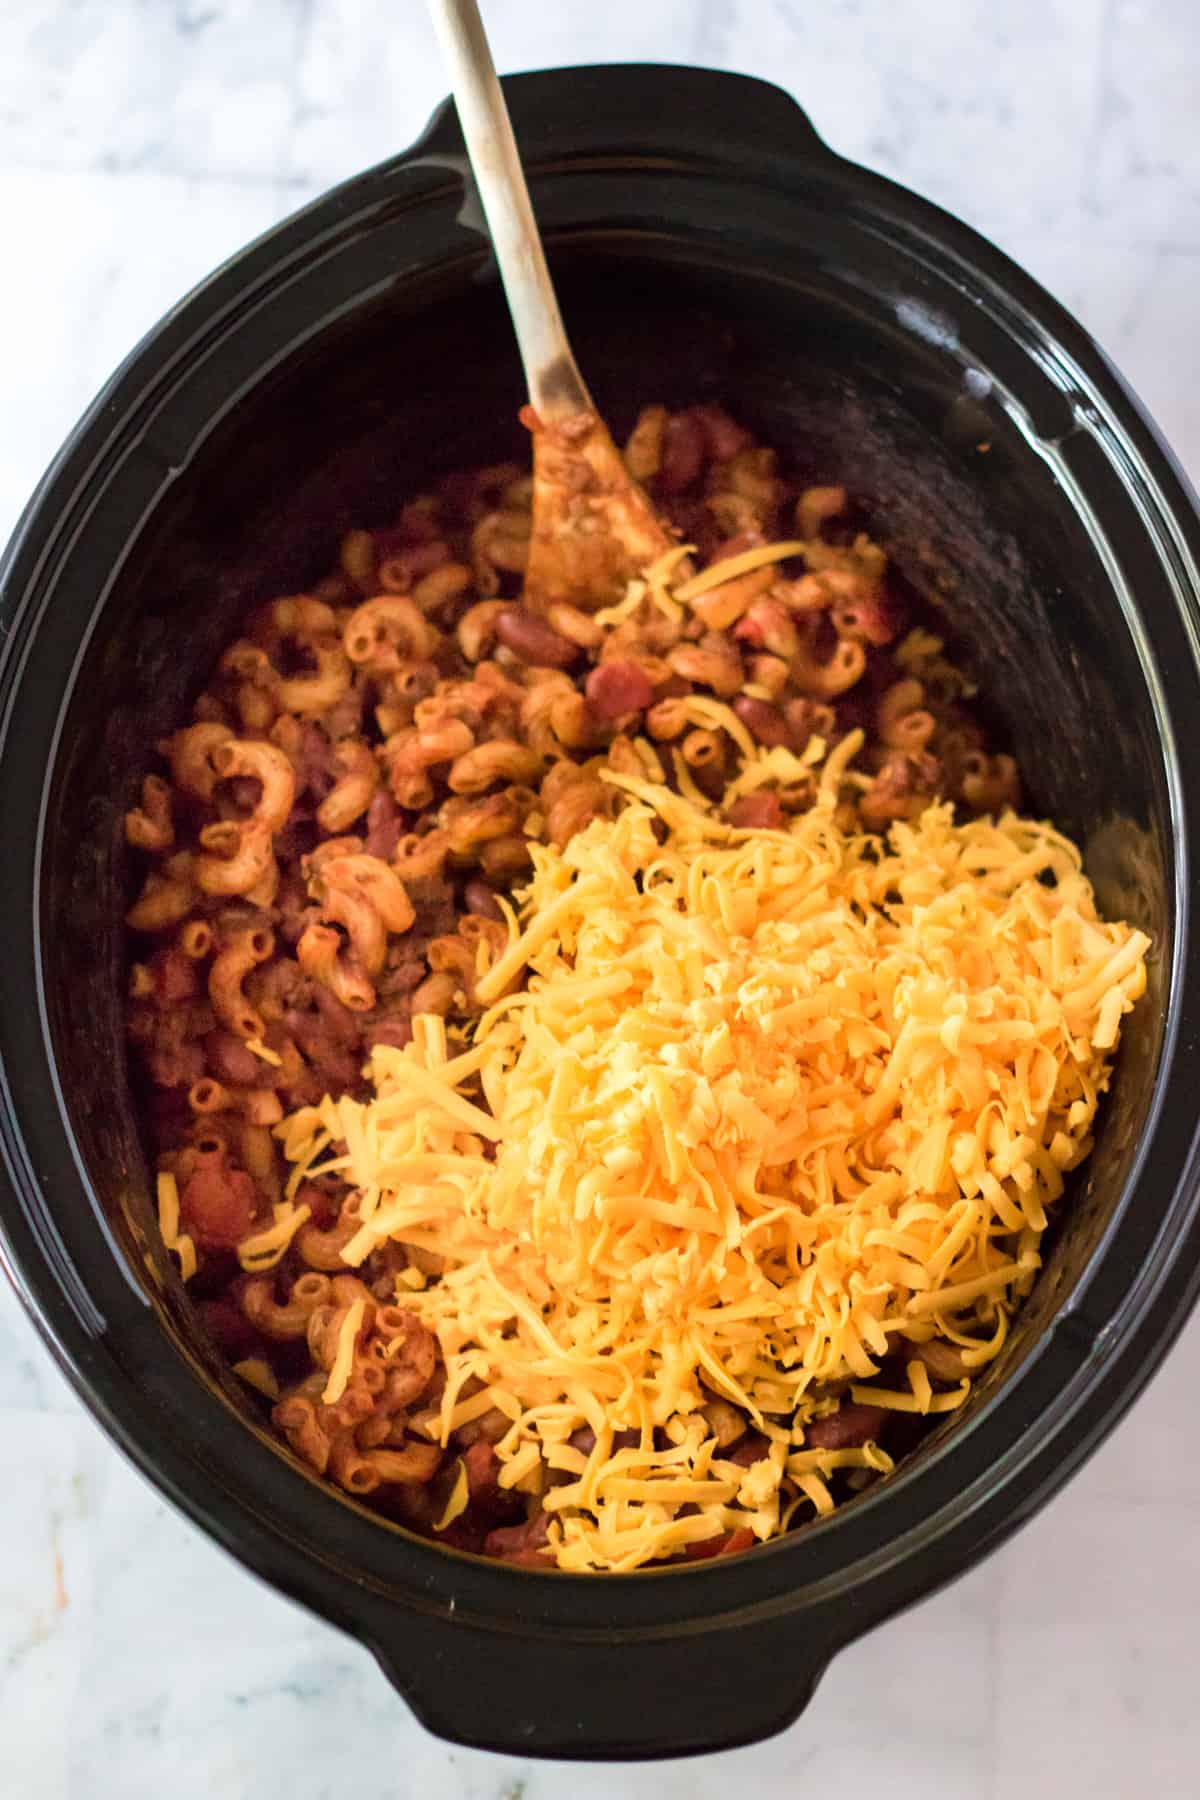 Shredded cheddar cheese added to slow cooker.